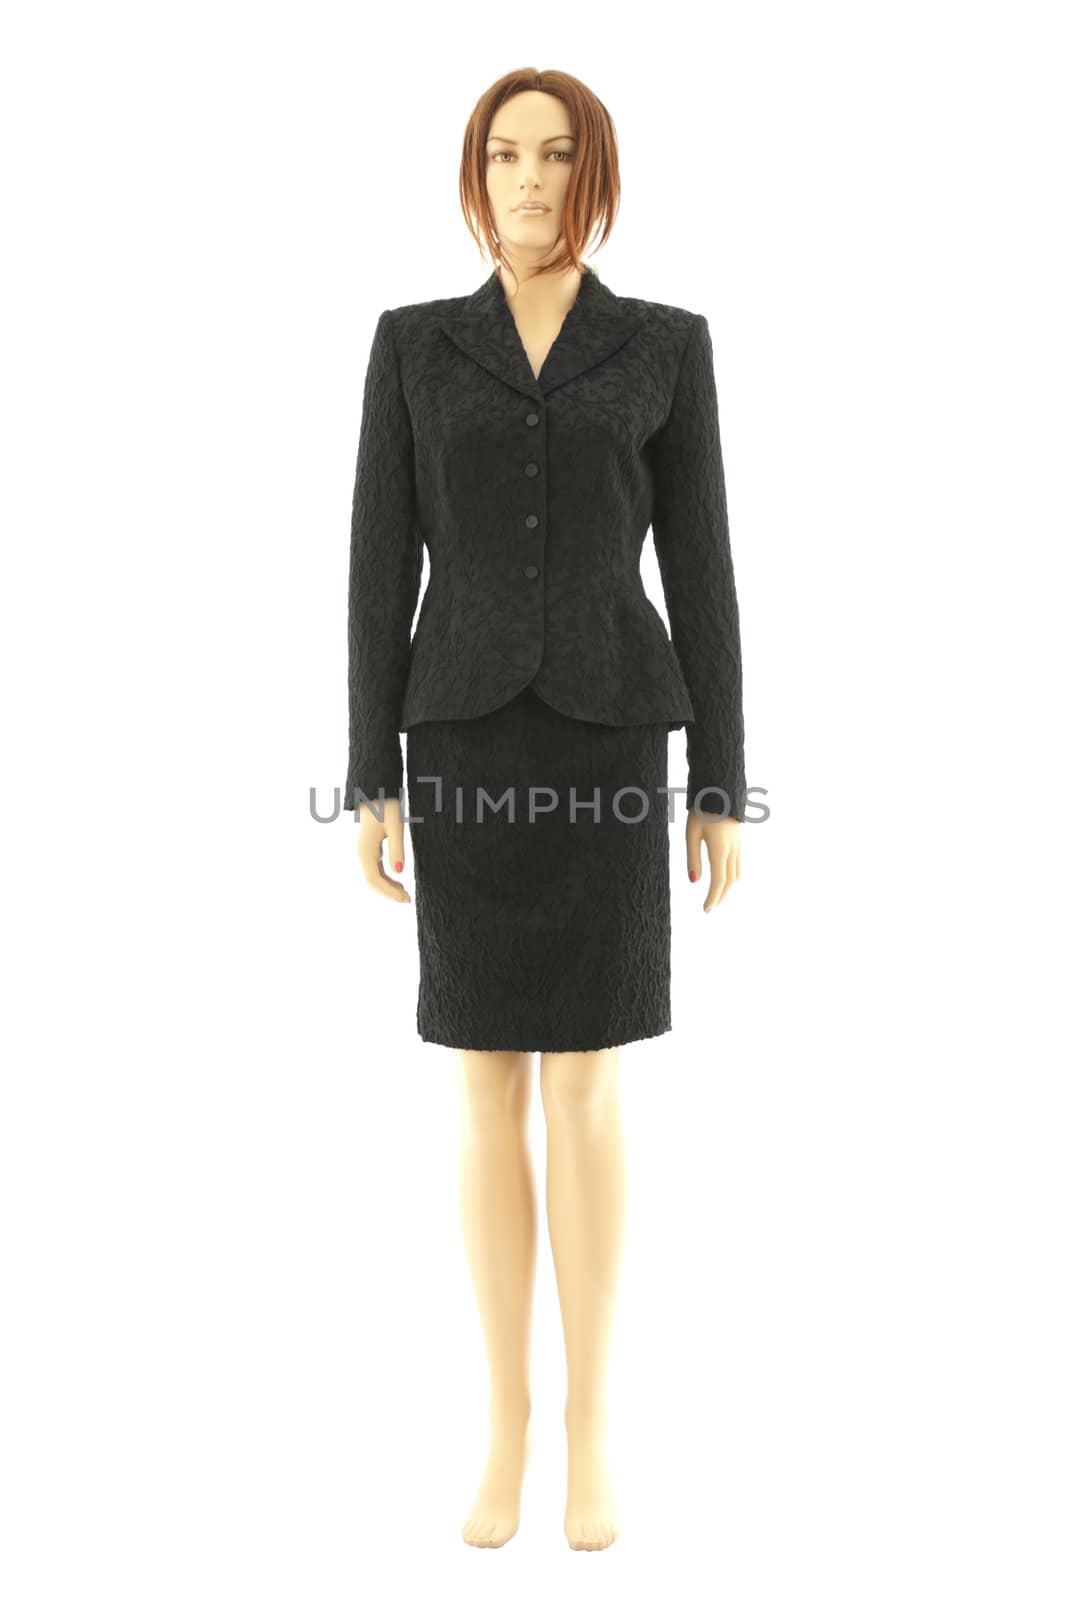 Female mannequin with hairs in black classic suit. Isolated on white background